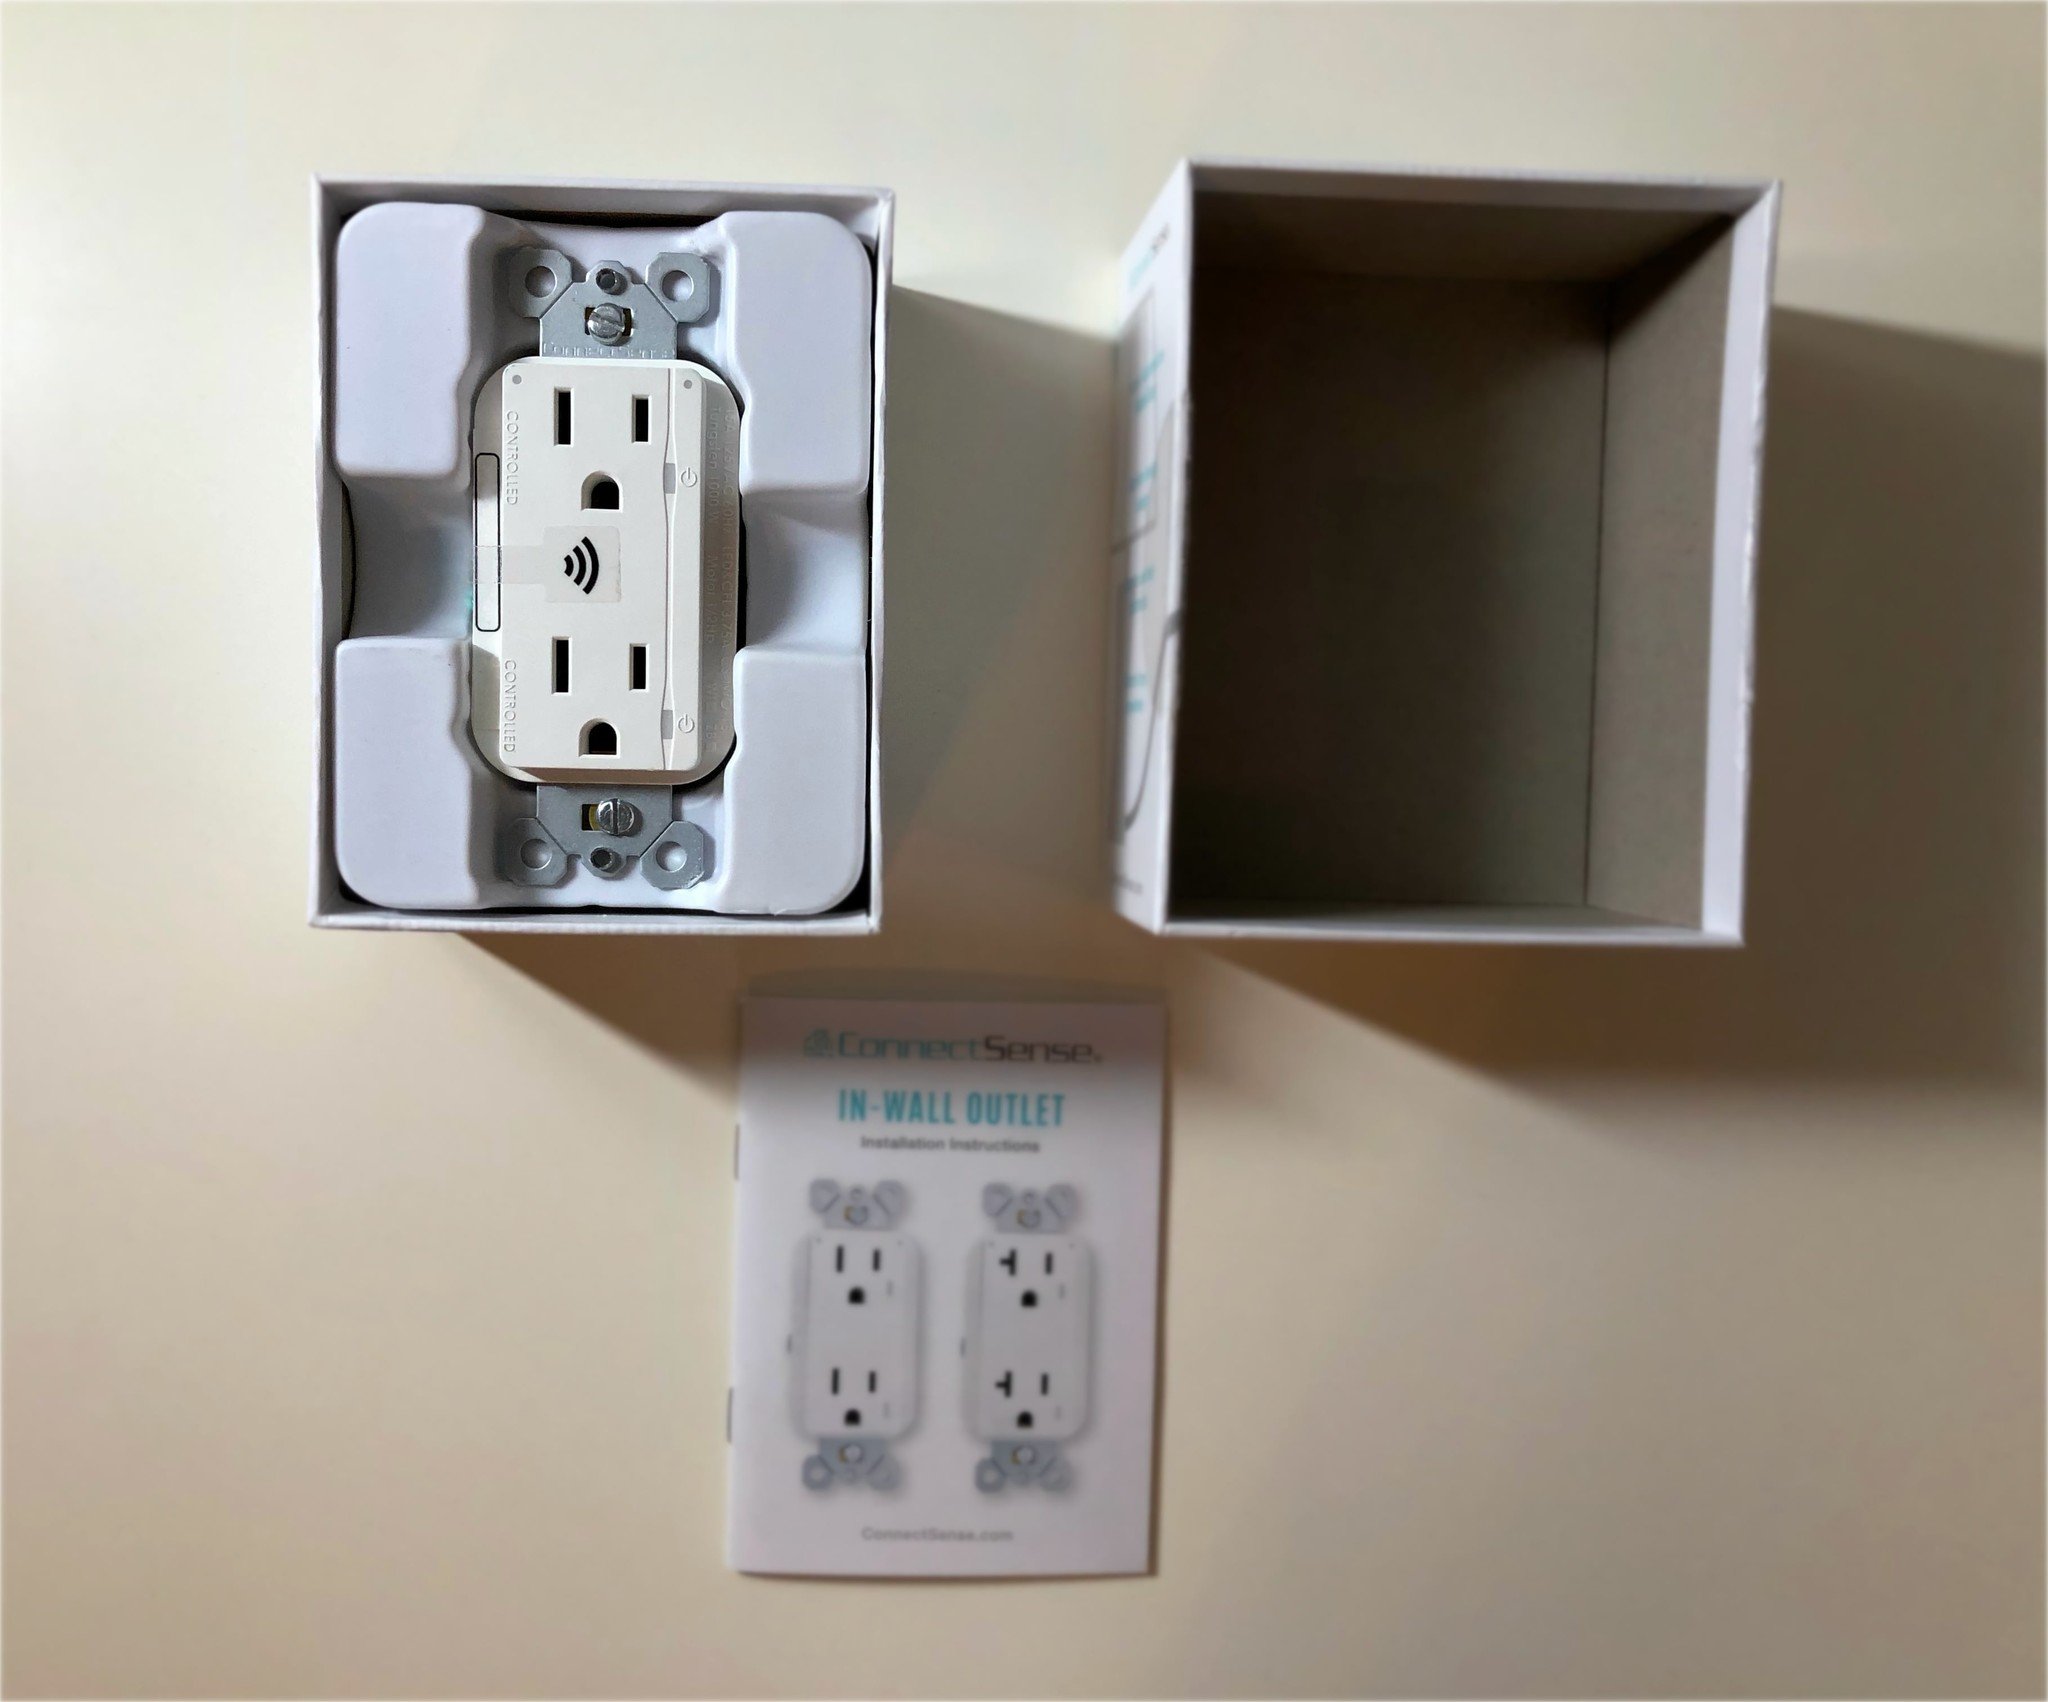 Connectsense Smart Inwall Outlet Unboxing